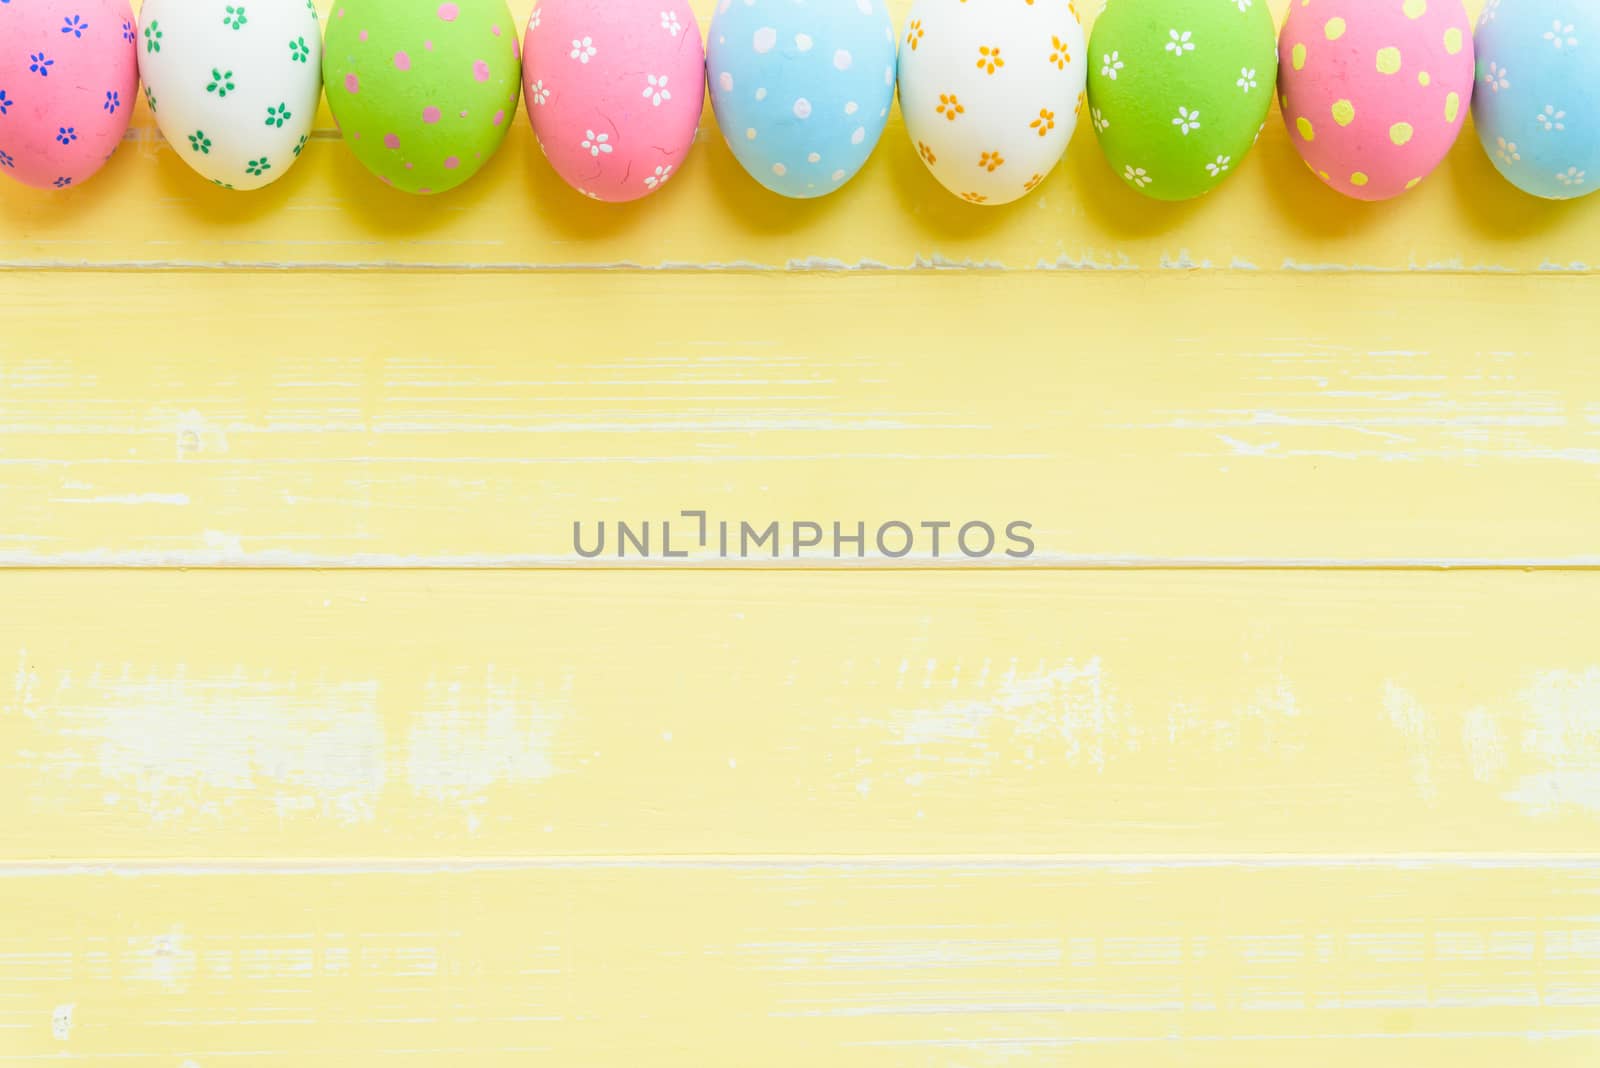 Happy easter! Row Easter eggs with colorful paper flowers on bright yellow wooden background.